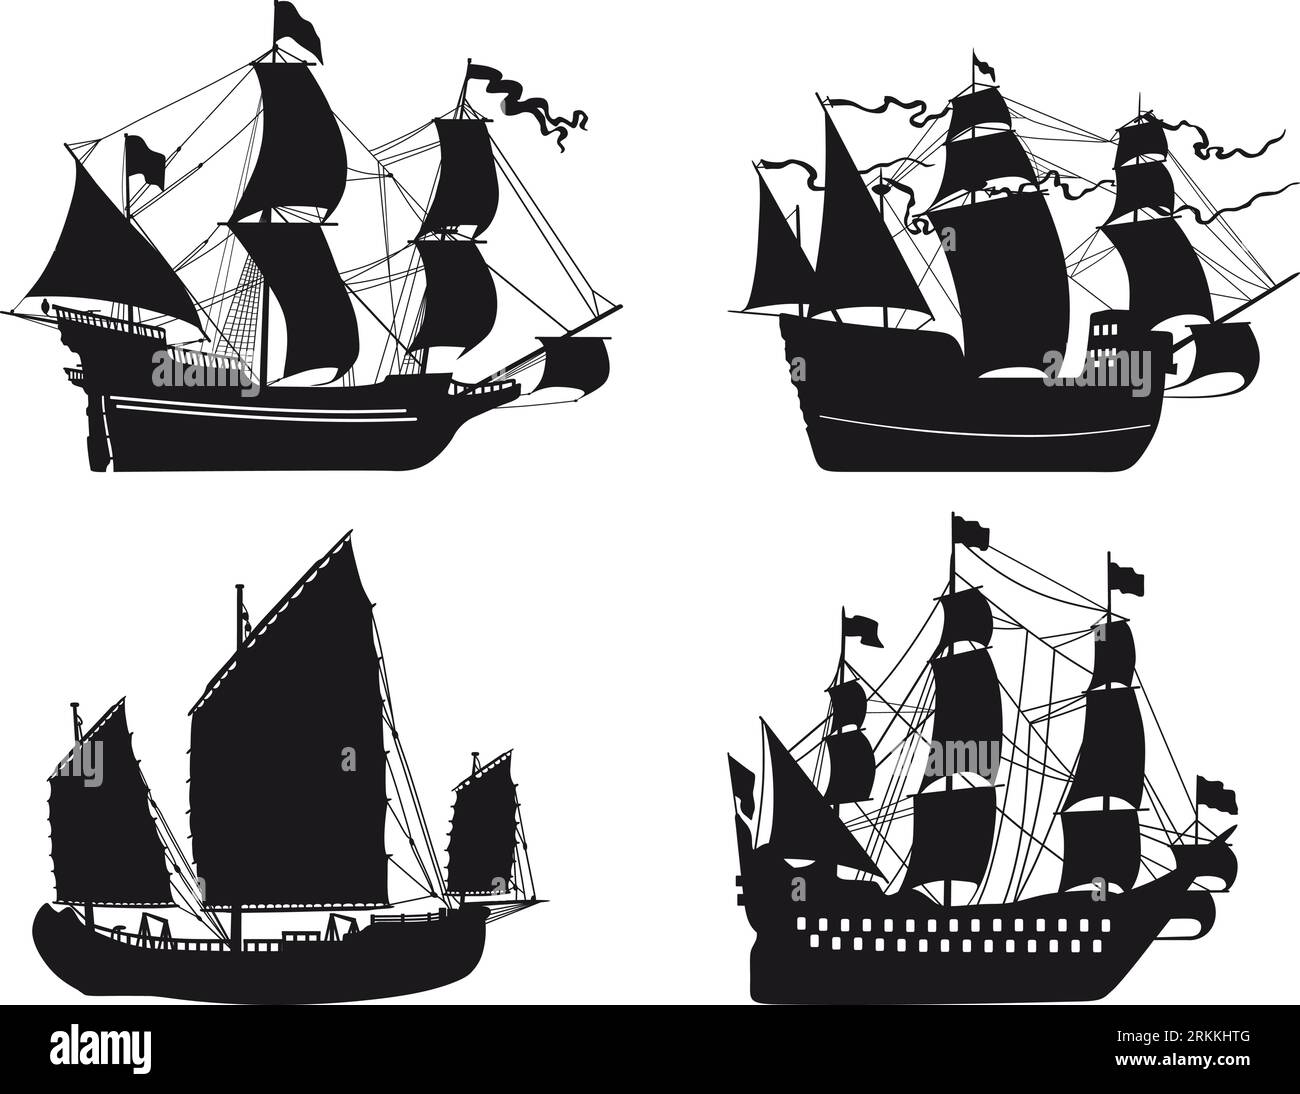 Detailed vector illustration of wooden ships in a flat style on a white background.Frigate, junk, sailboat. Stock Vector